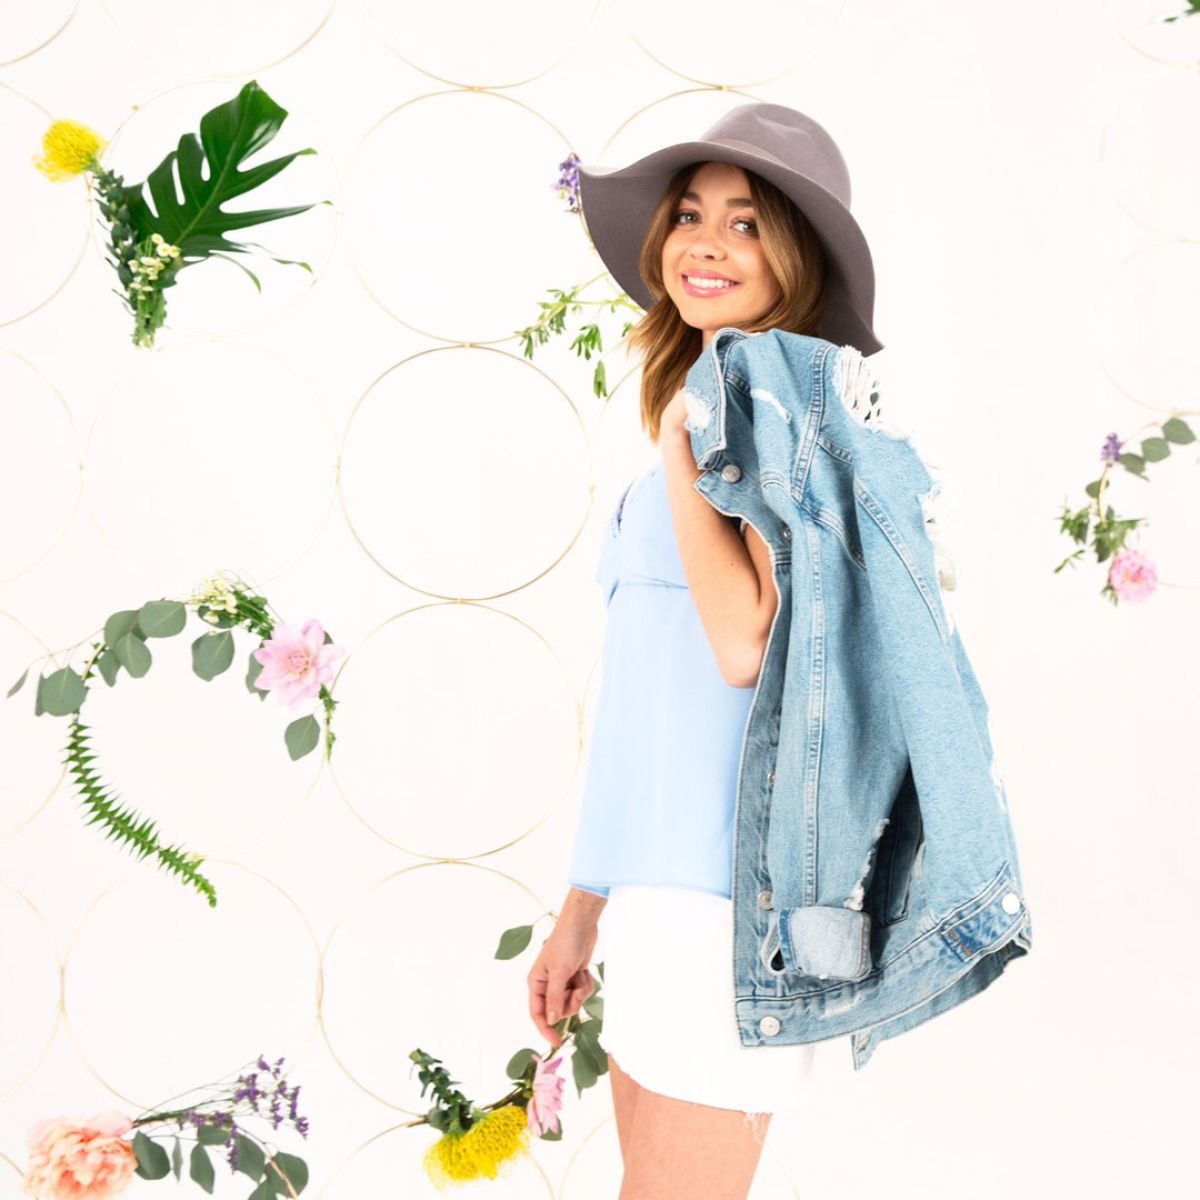 sarah-hyland-for-new-spring-collection-for-refinery29_2.jpg